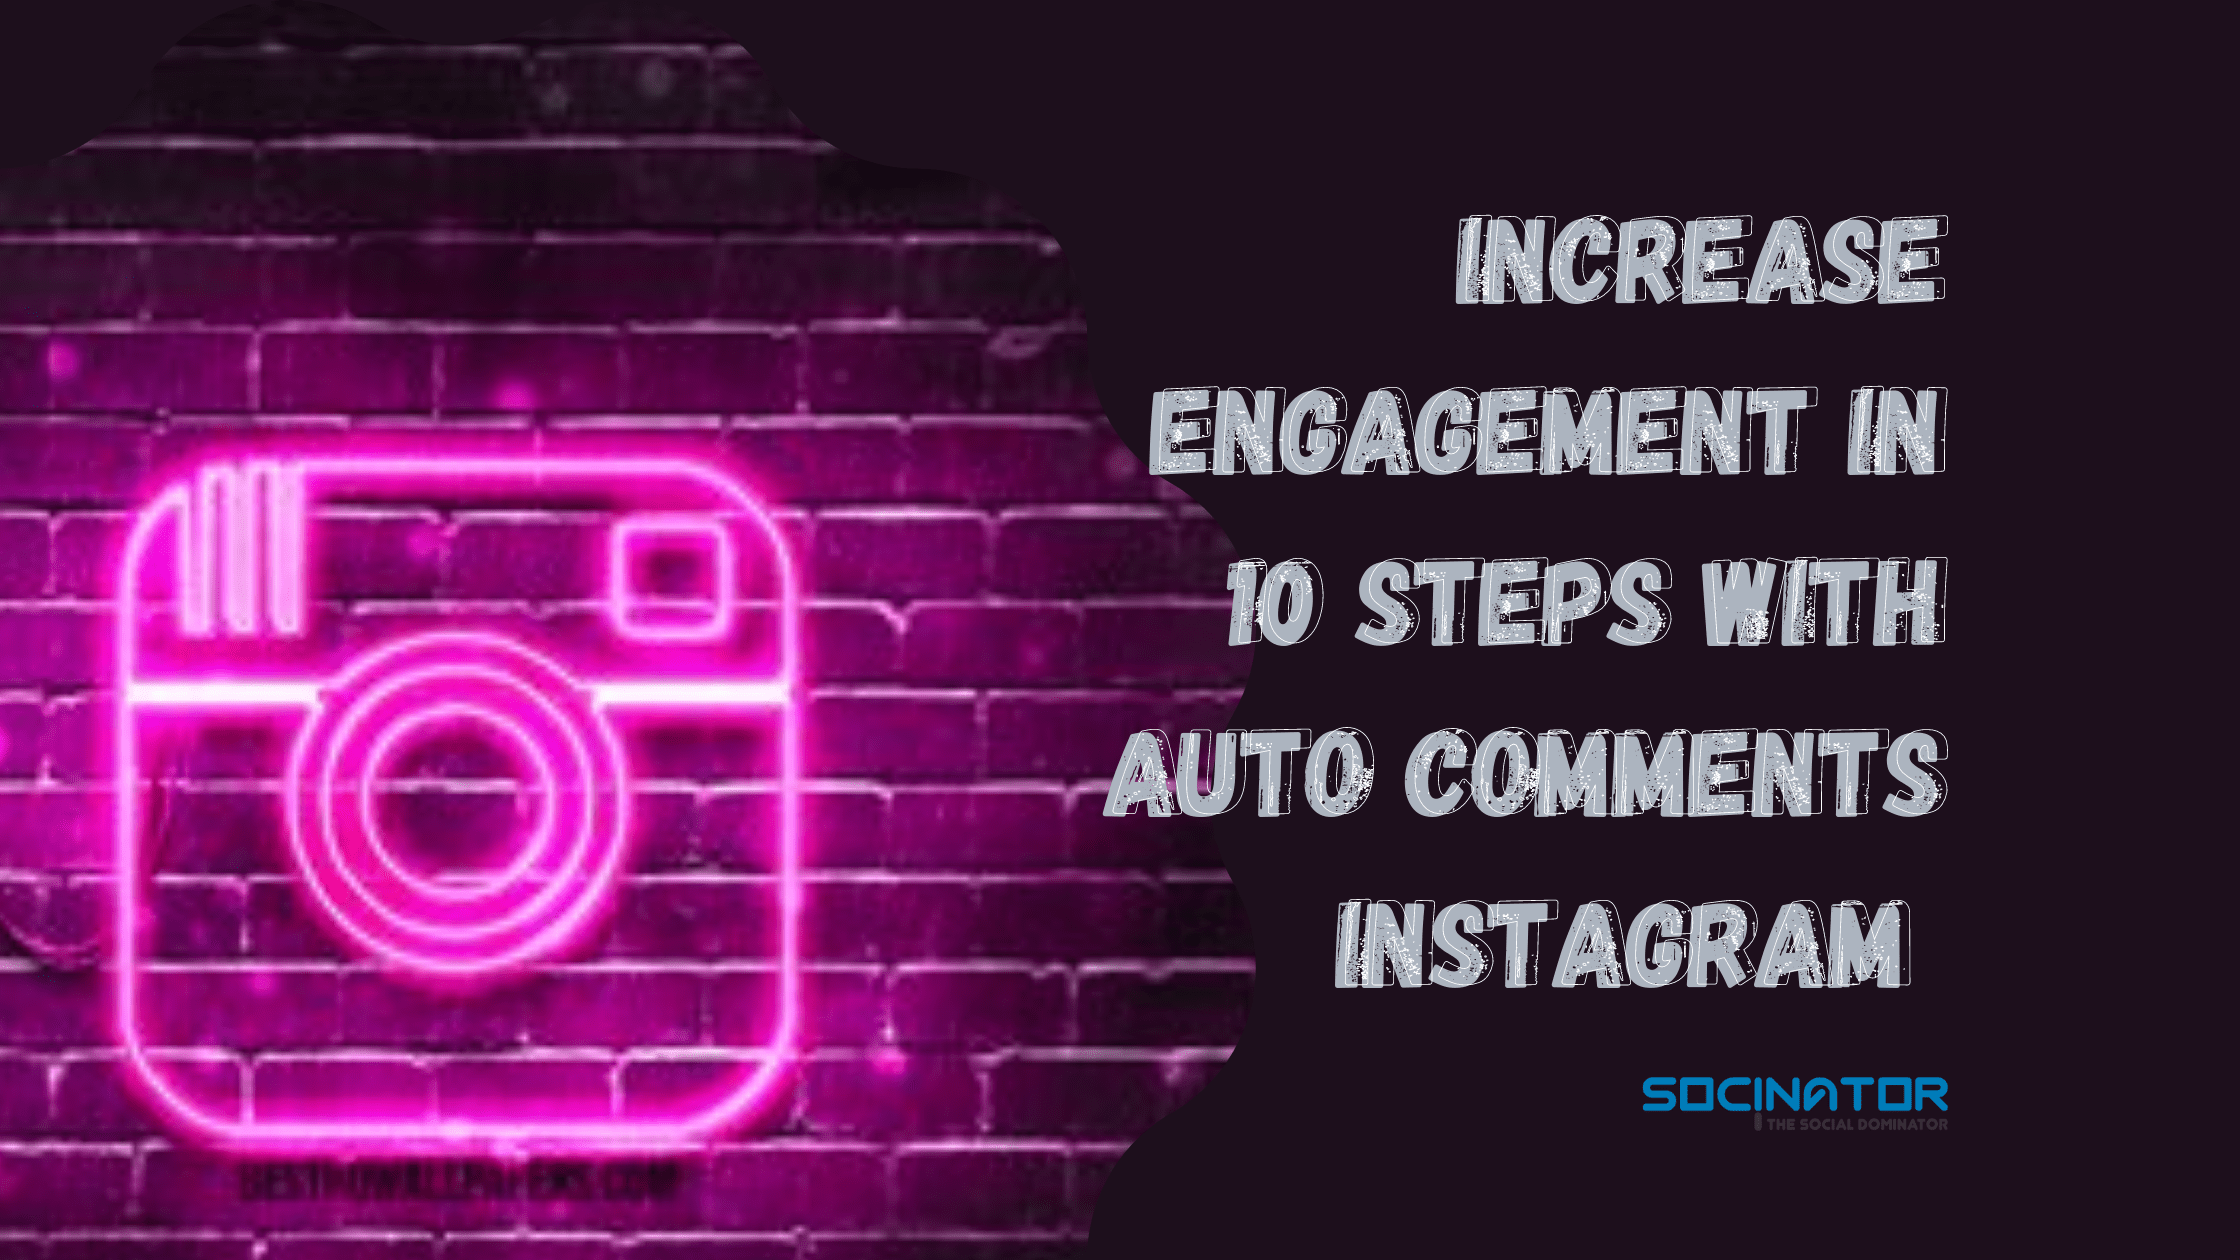 Increase Engagement In 10 Steps With Auto Comments Instagram